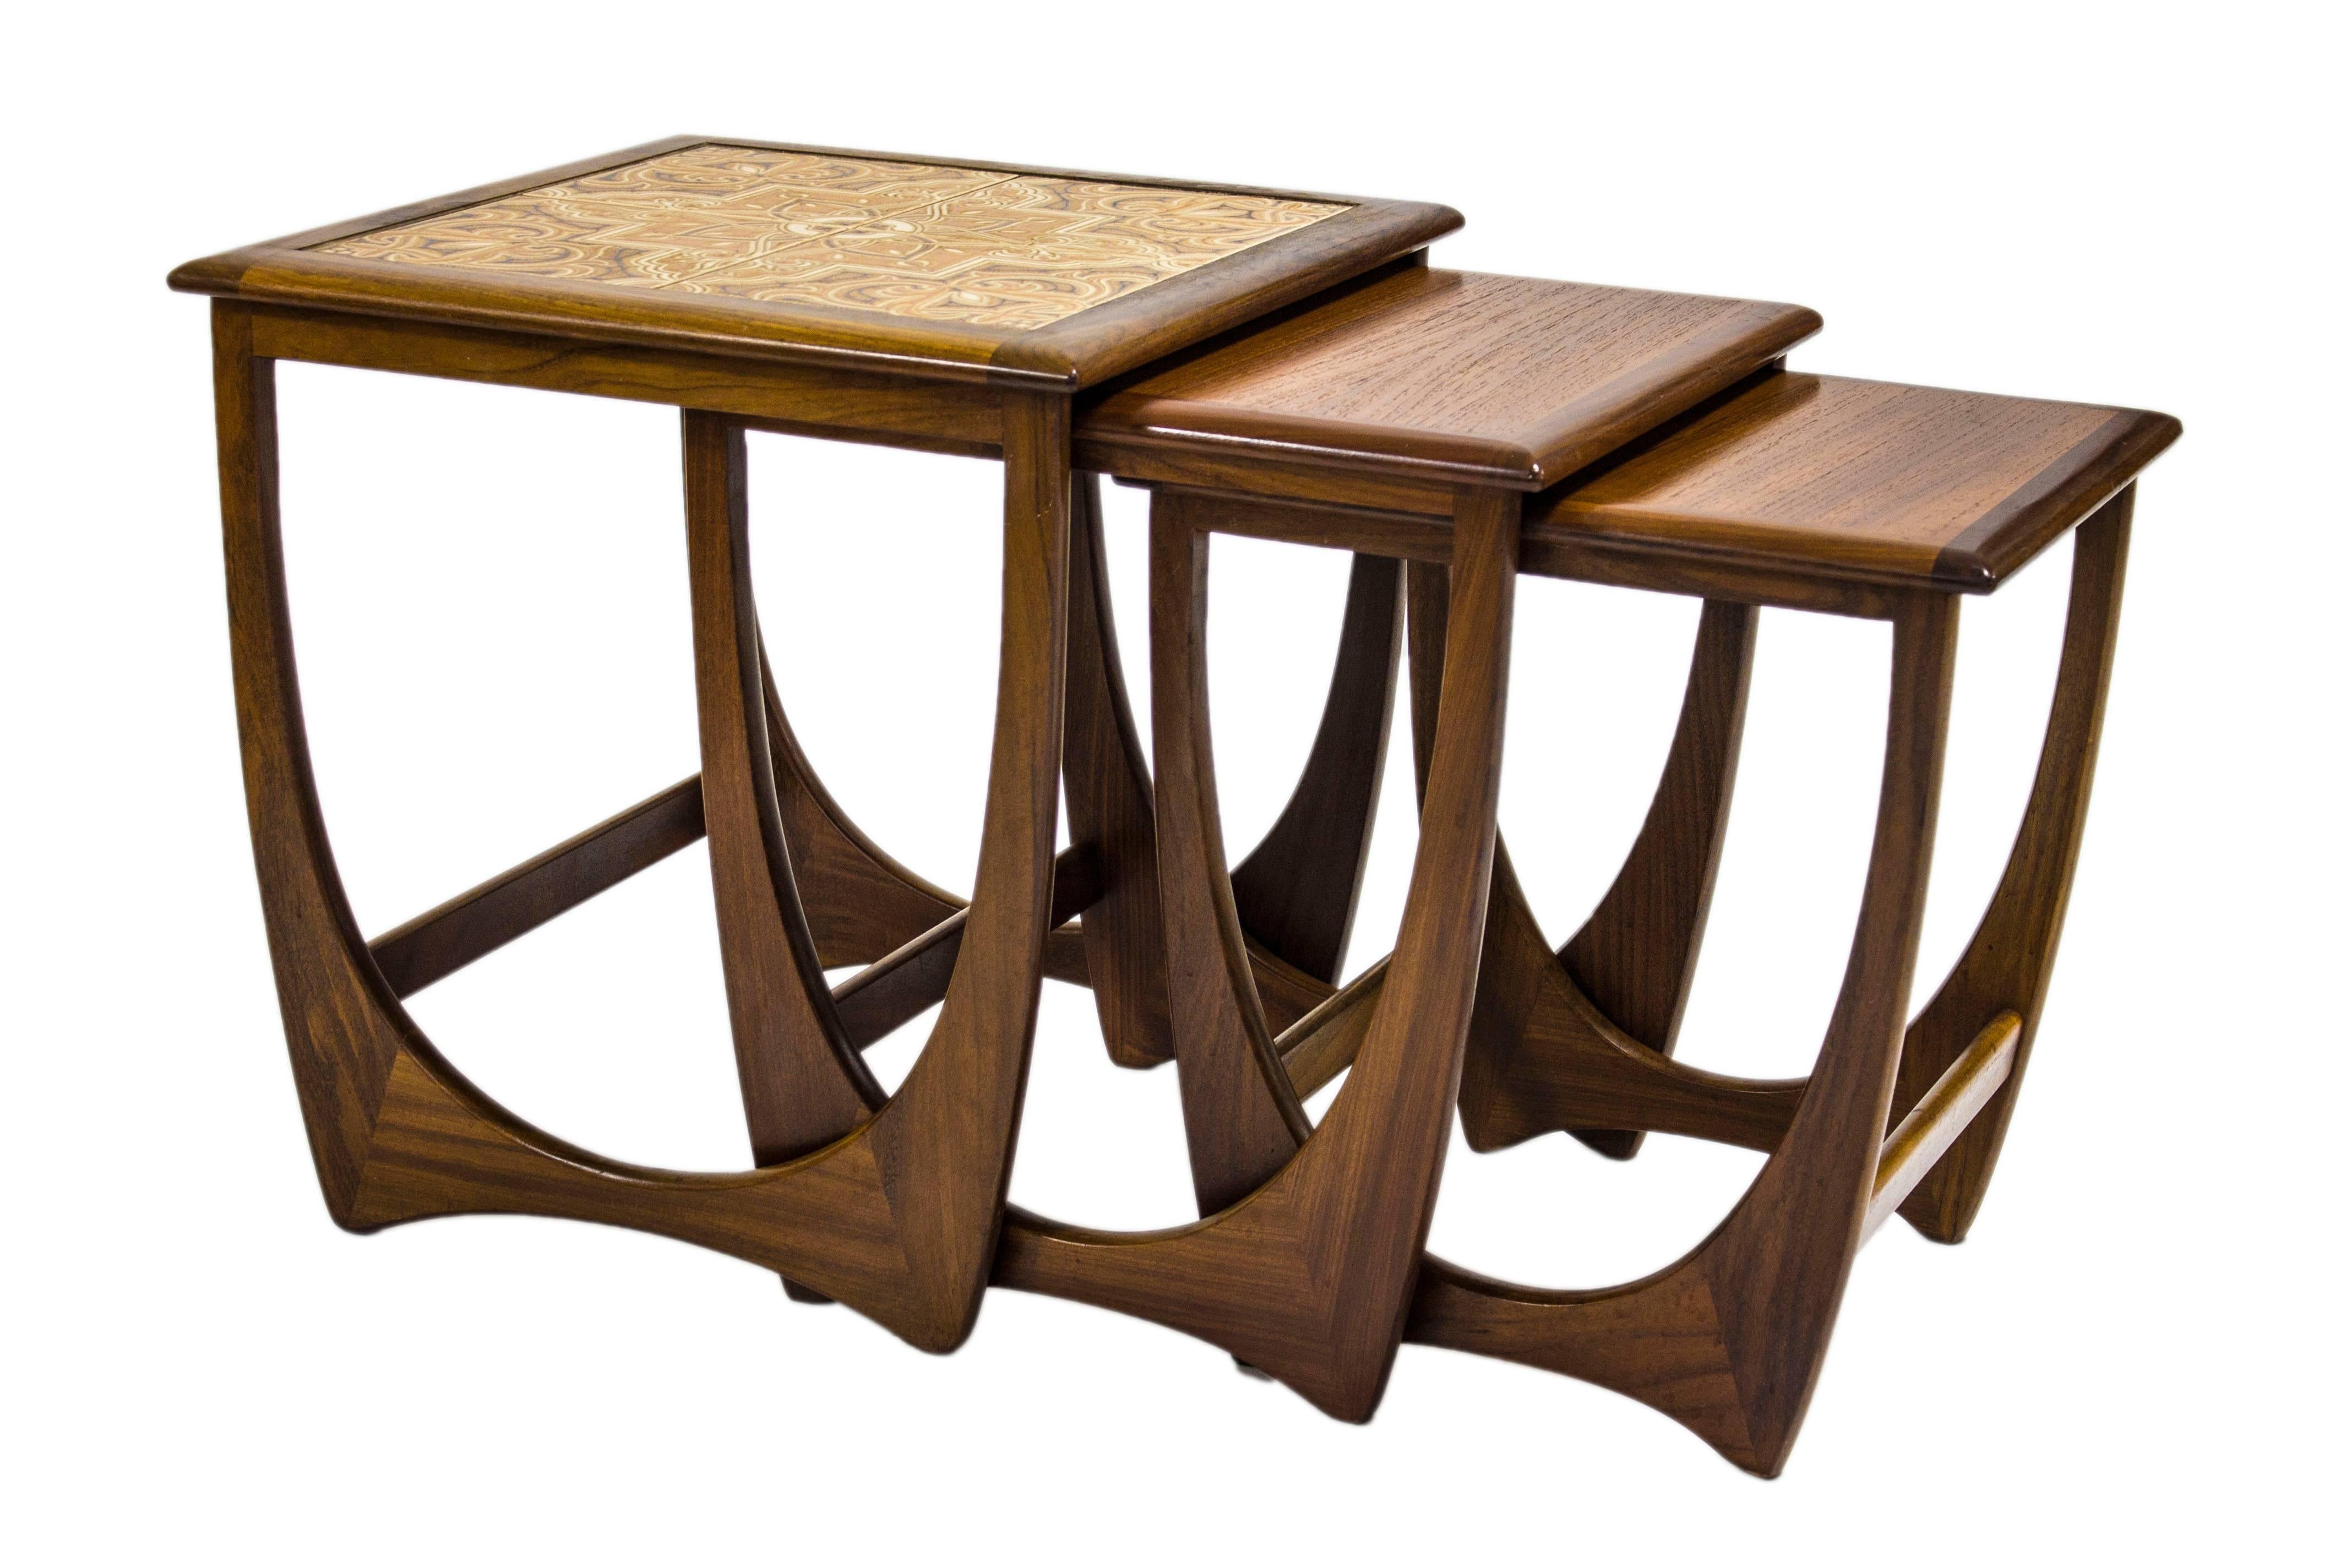 V B Wilkins Fresco range of furniture for G Plan was functional ad versatile with a stunning design and elegant use of contrasting woods that created stunning rich tones perfect for any space.

Taking the humble nest of tables to a new level,